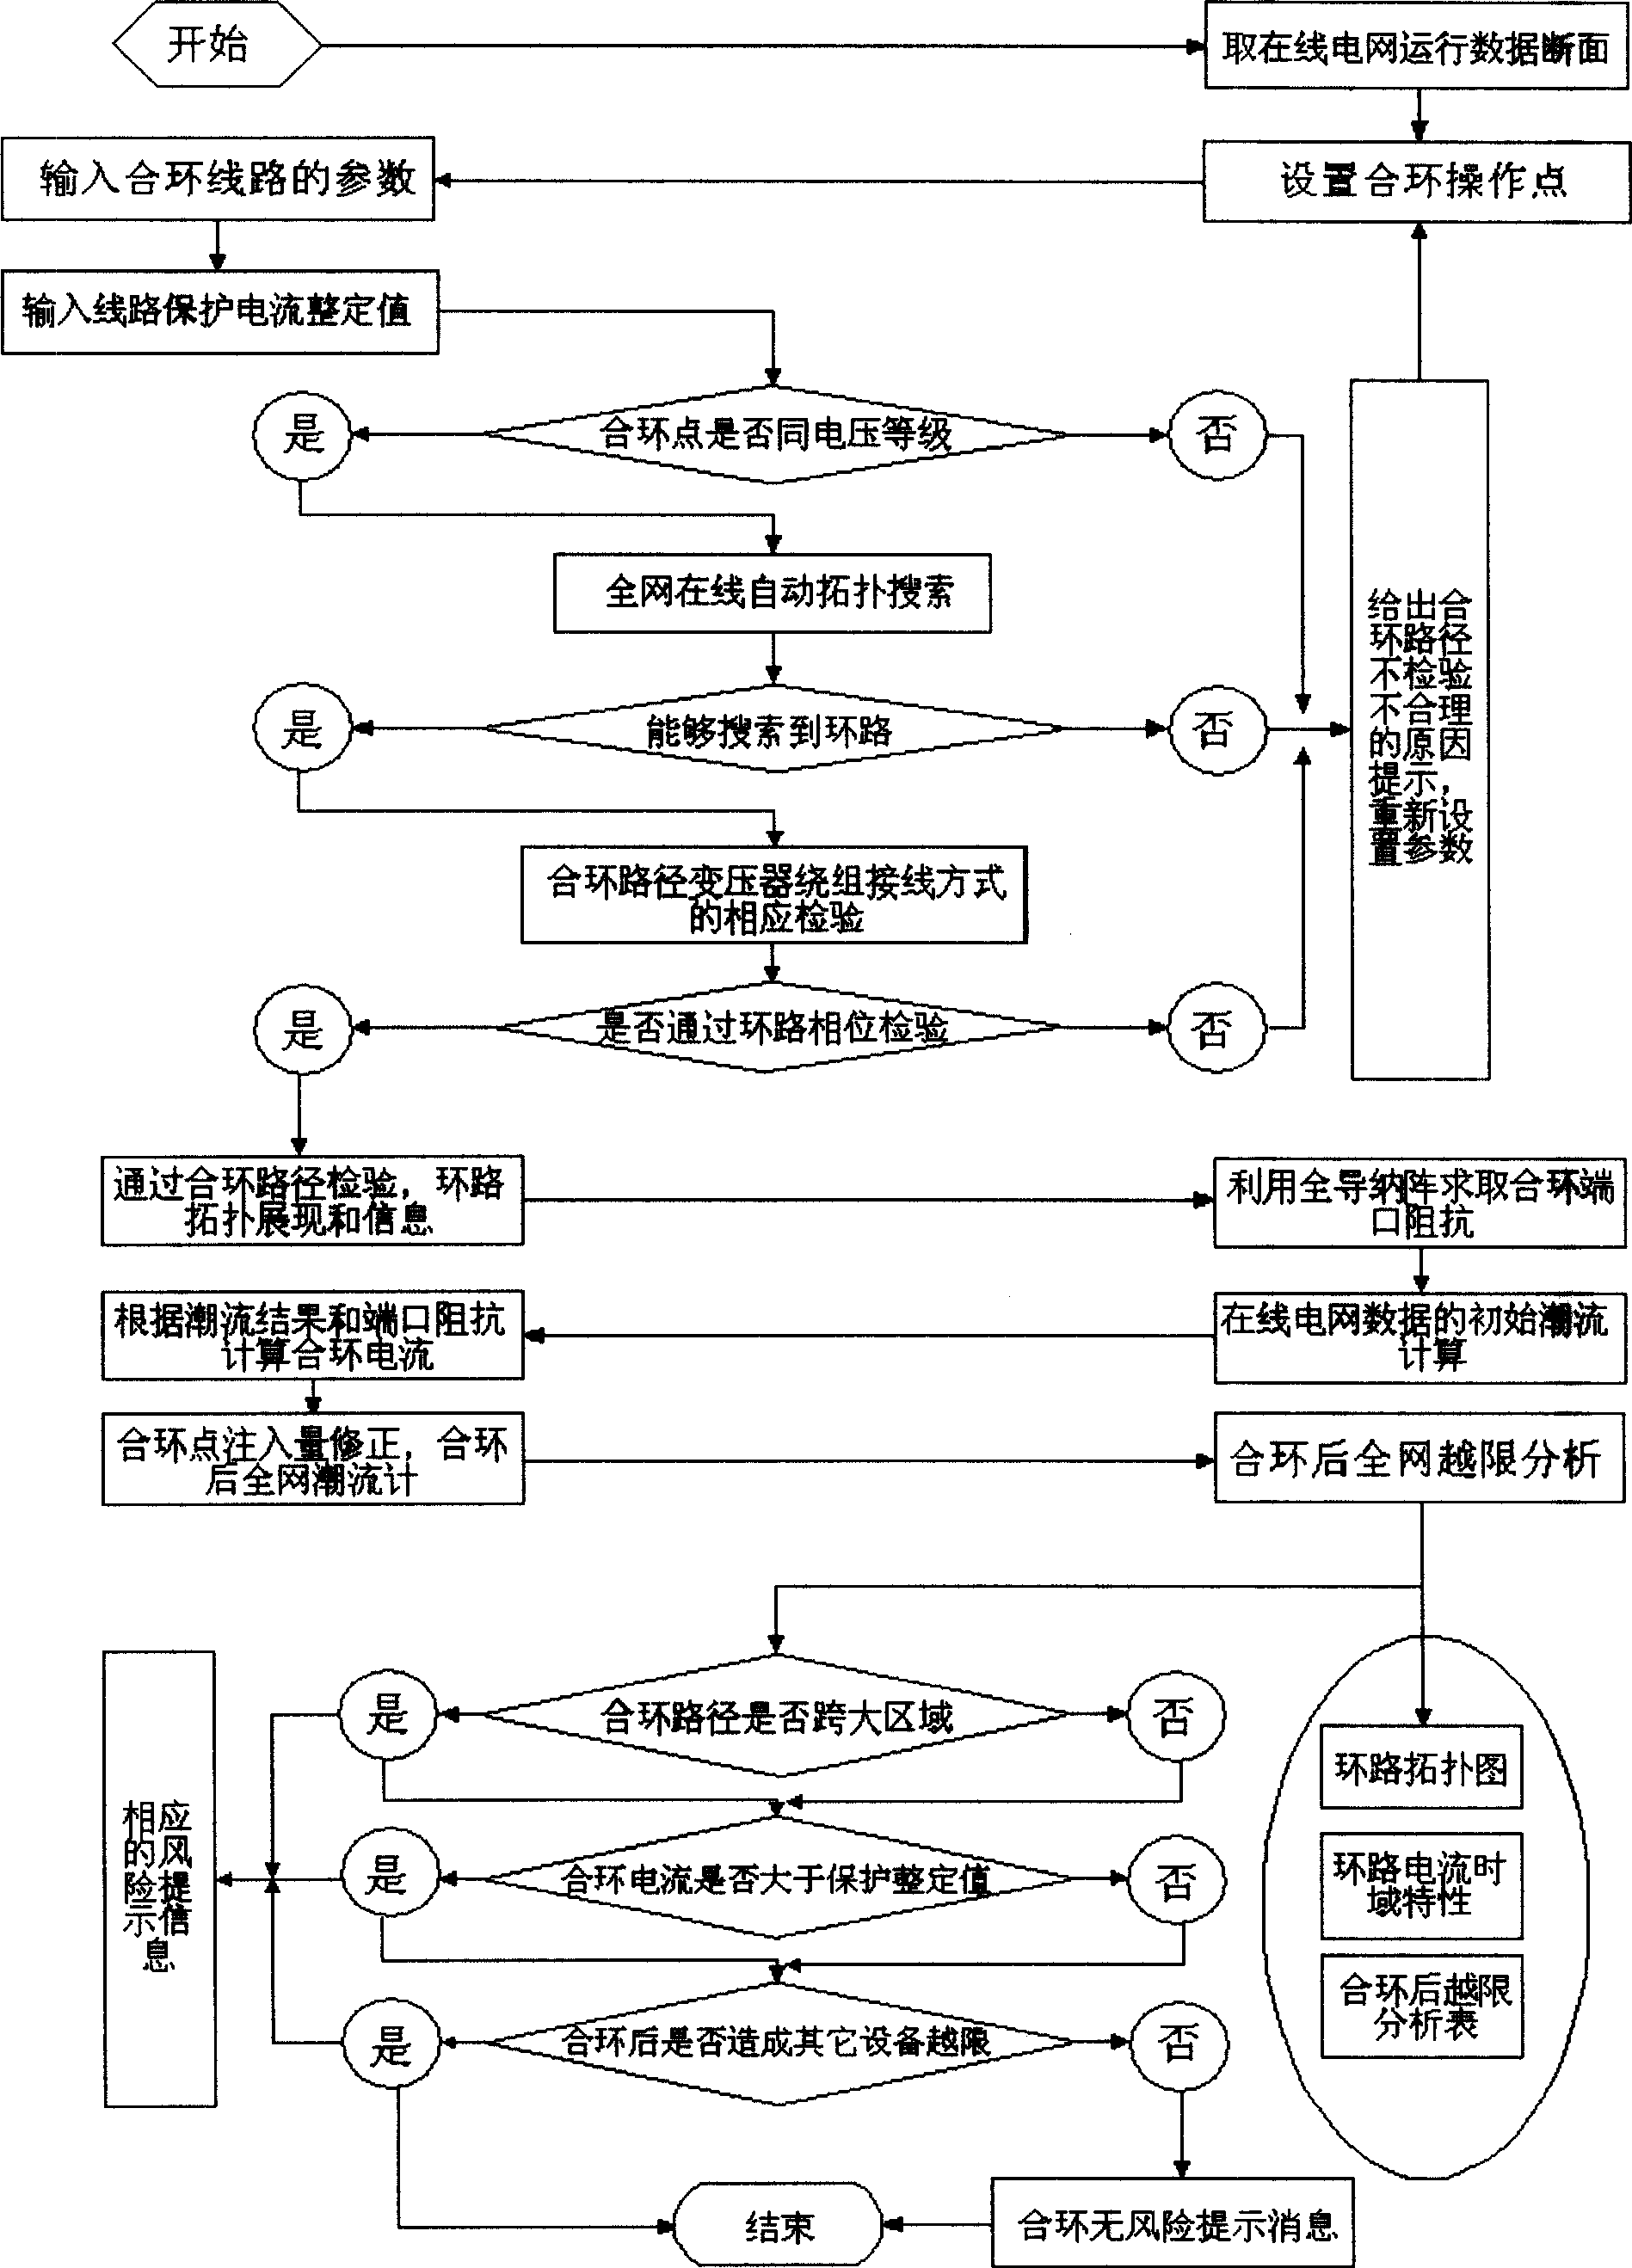 Closed loop operation risk analysis method for power system